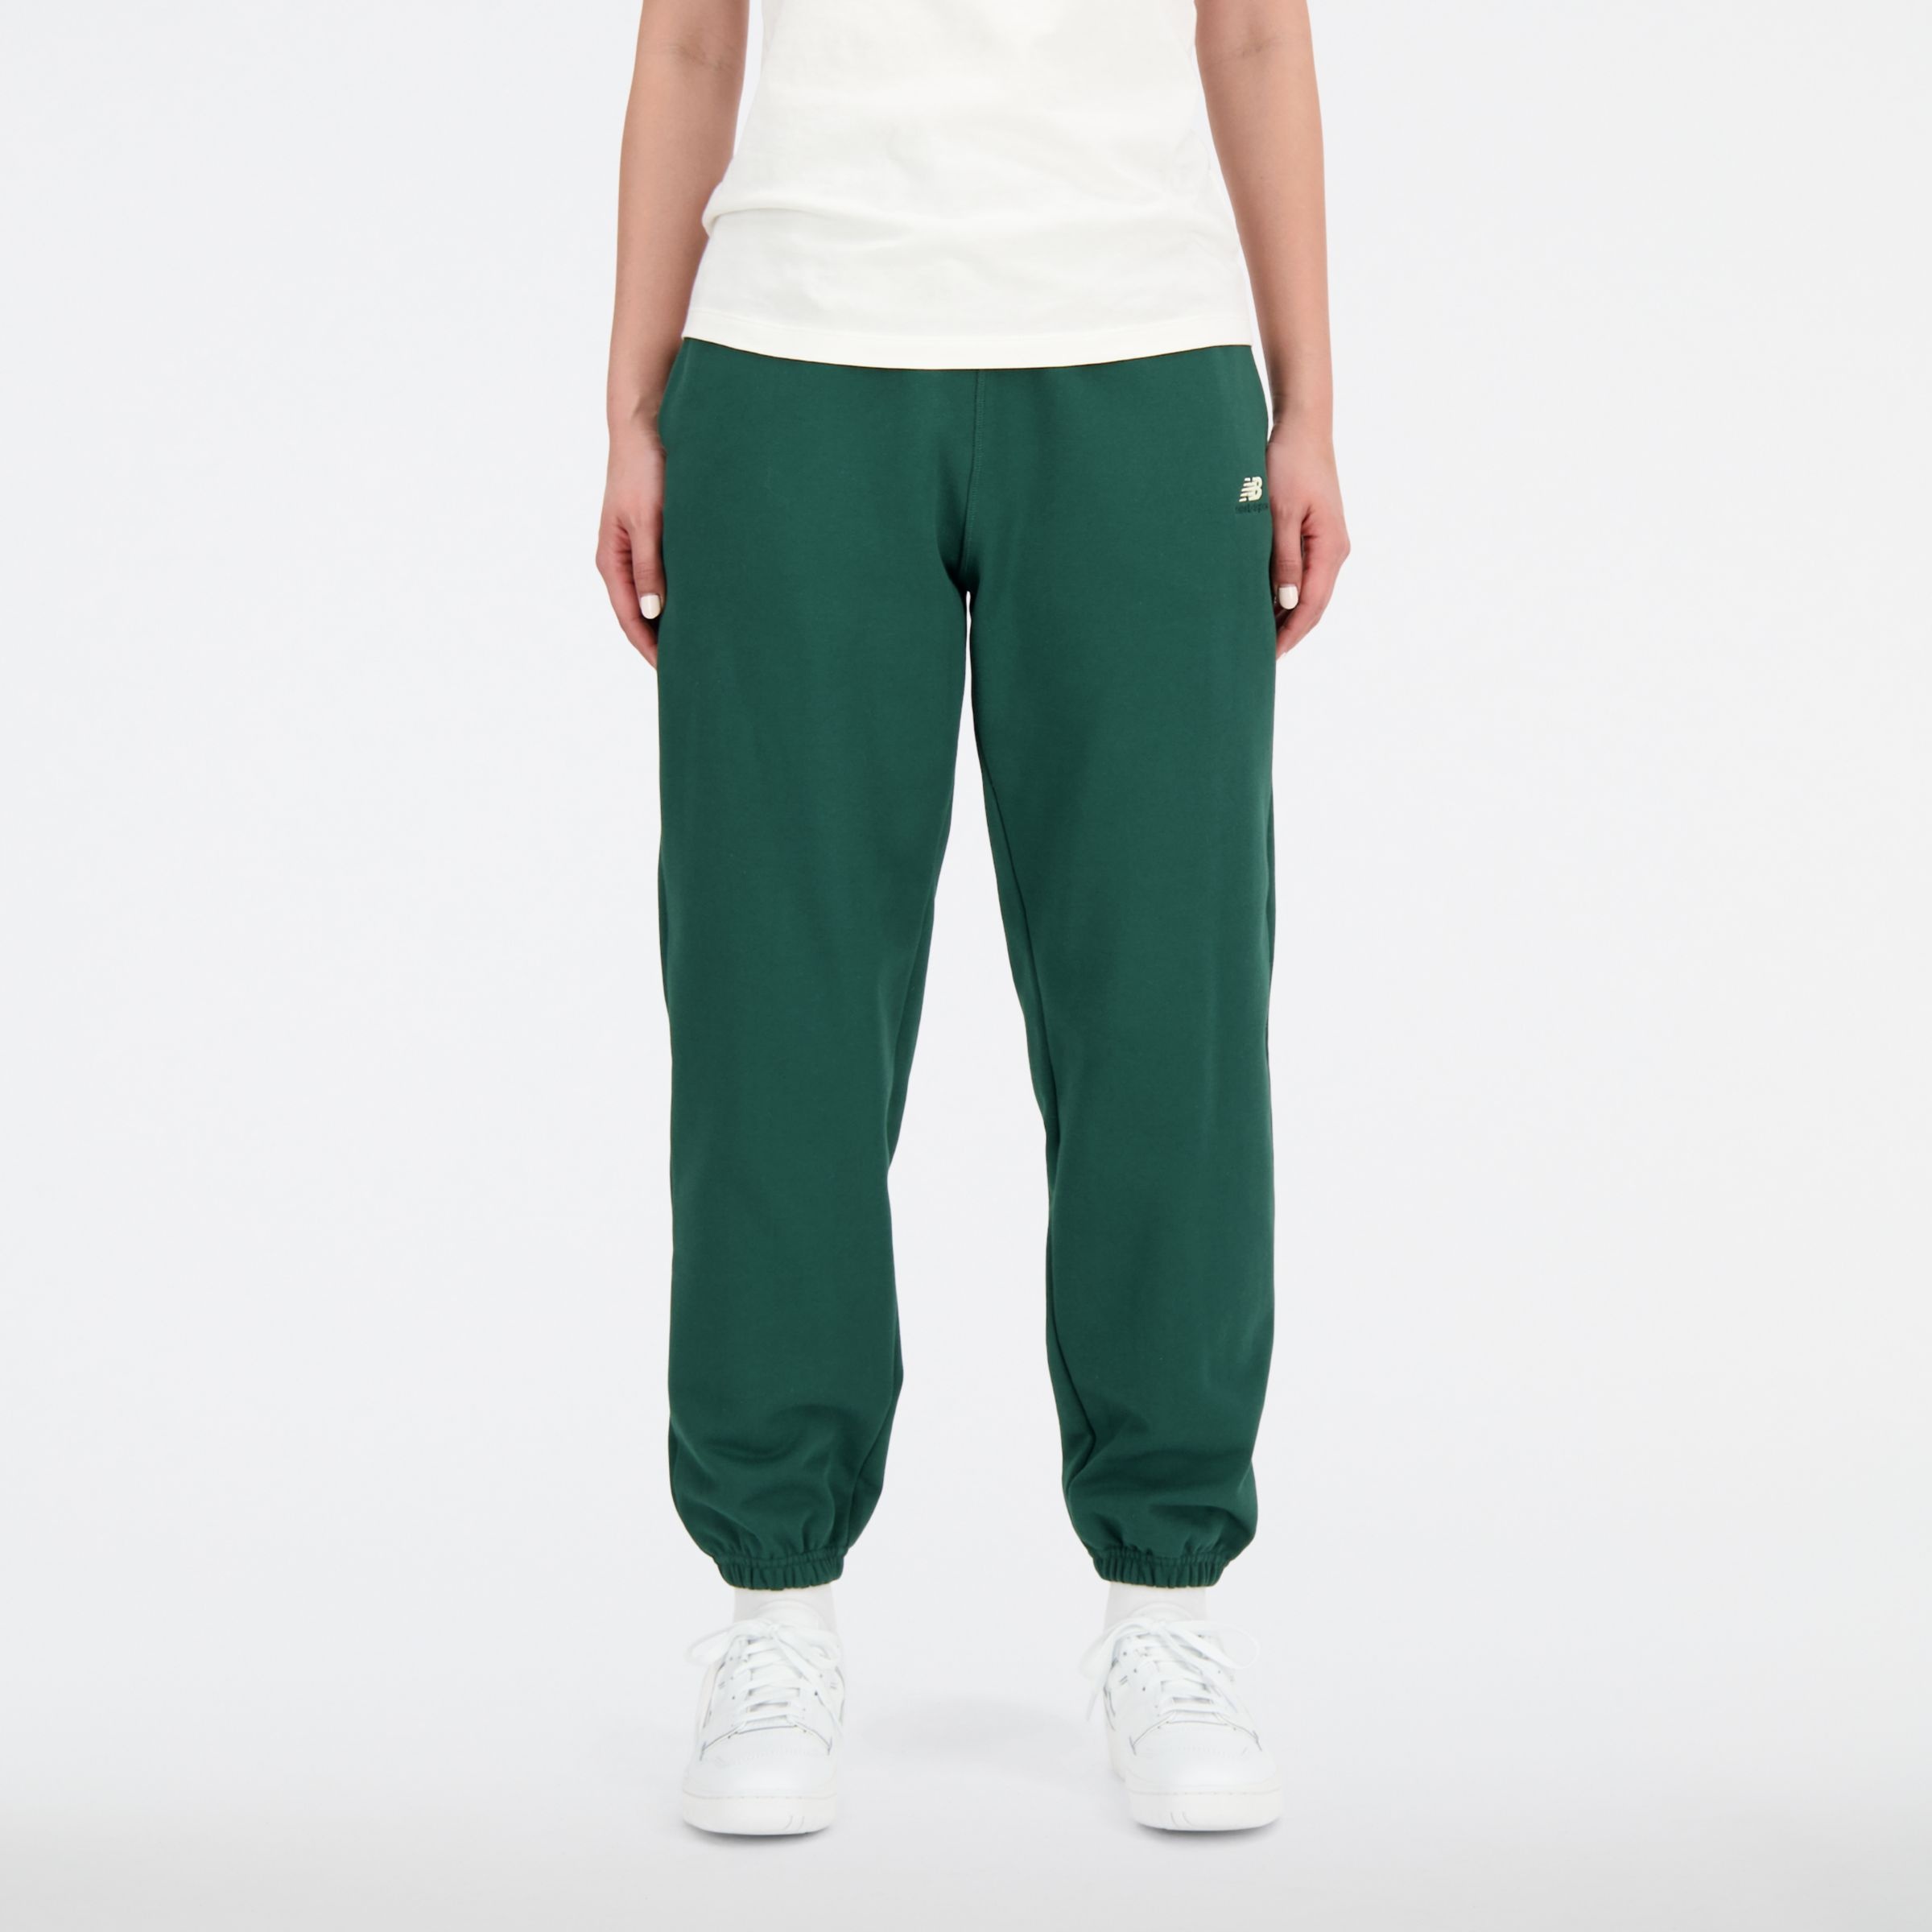 Athletics Remastered French Terry Pant - 2